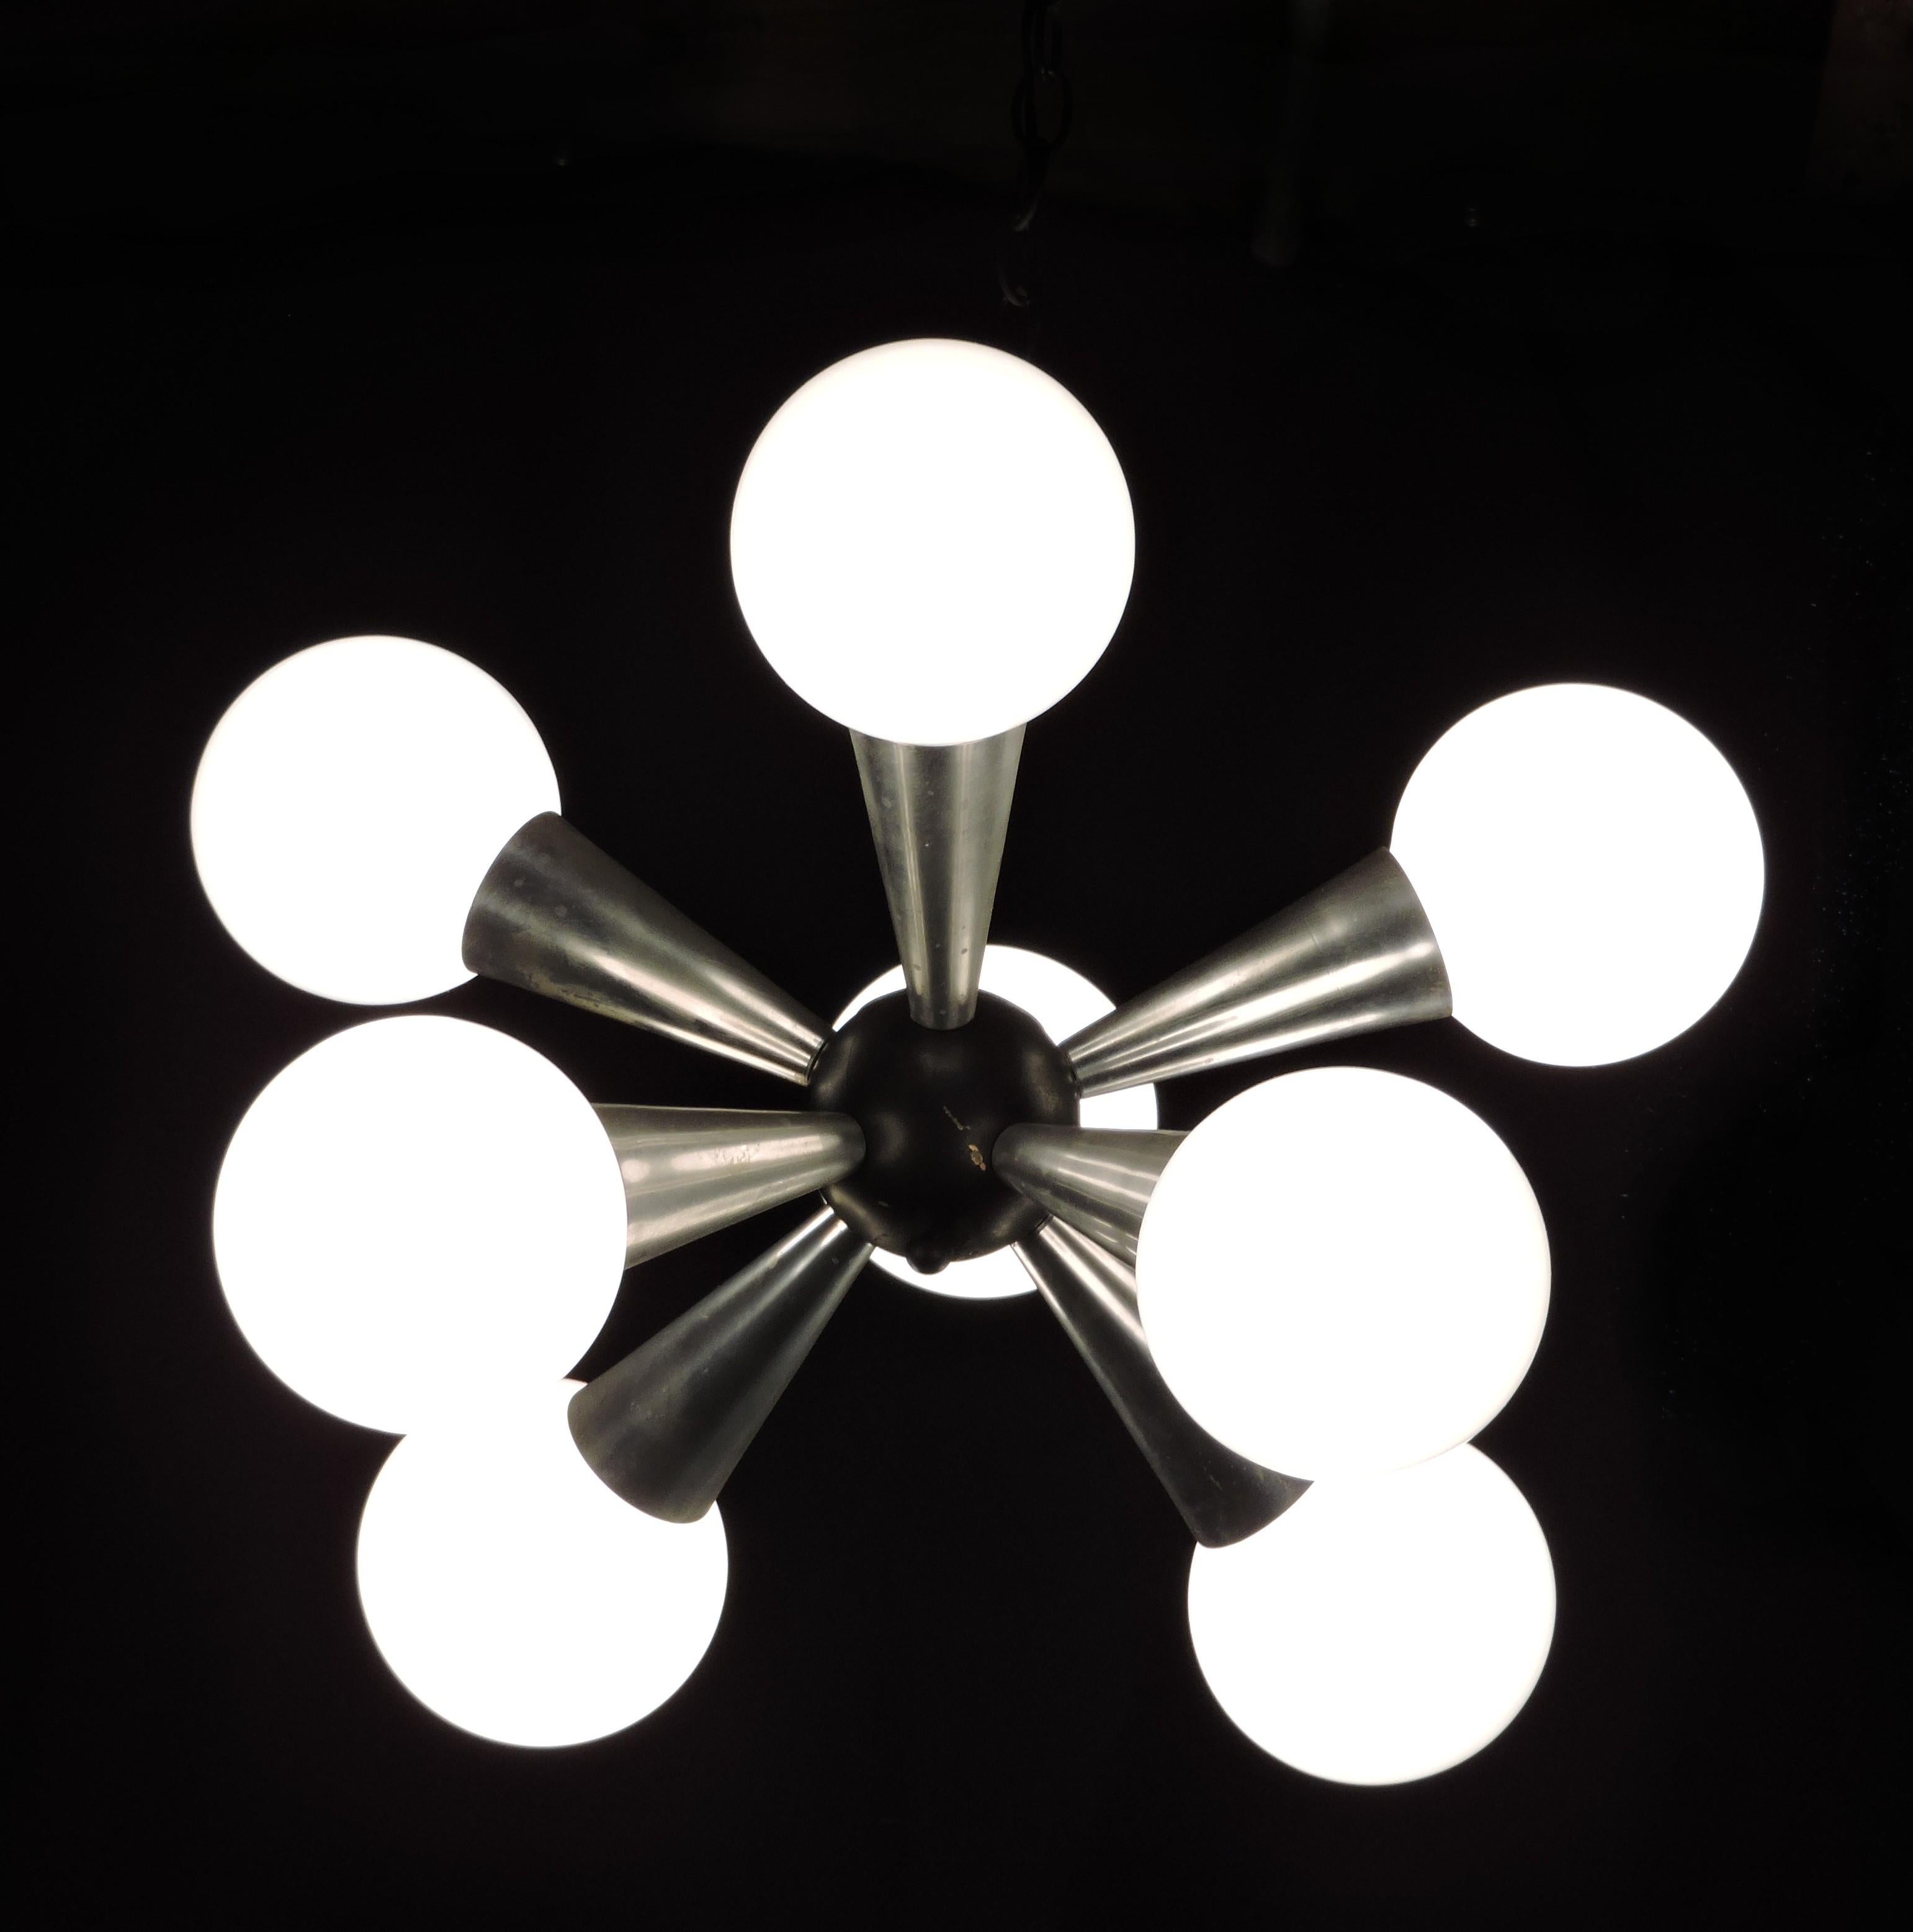 Very cool 8 light Sputnik chandelier. This light fixture has 8 aluminum cone shaped arms radiating out of a black center ball. There is an 18